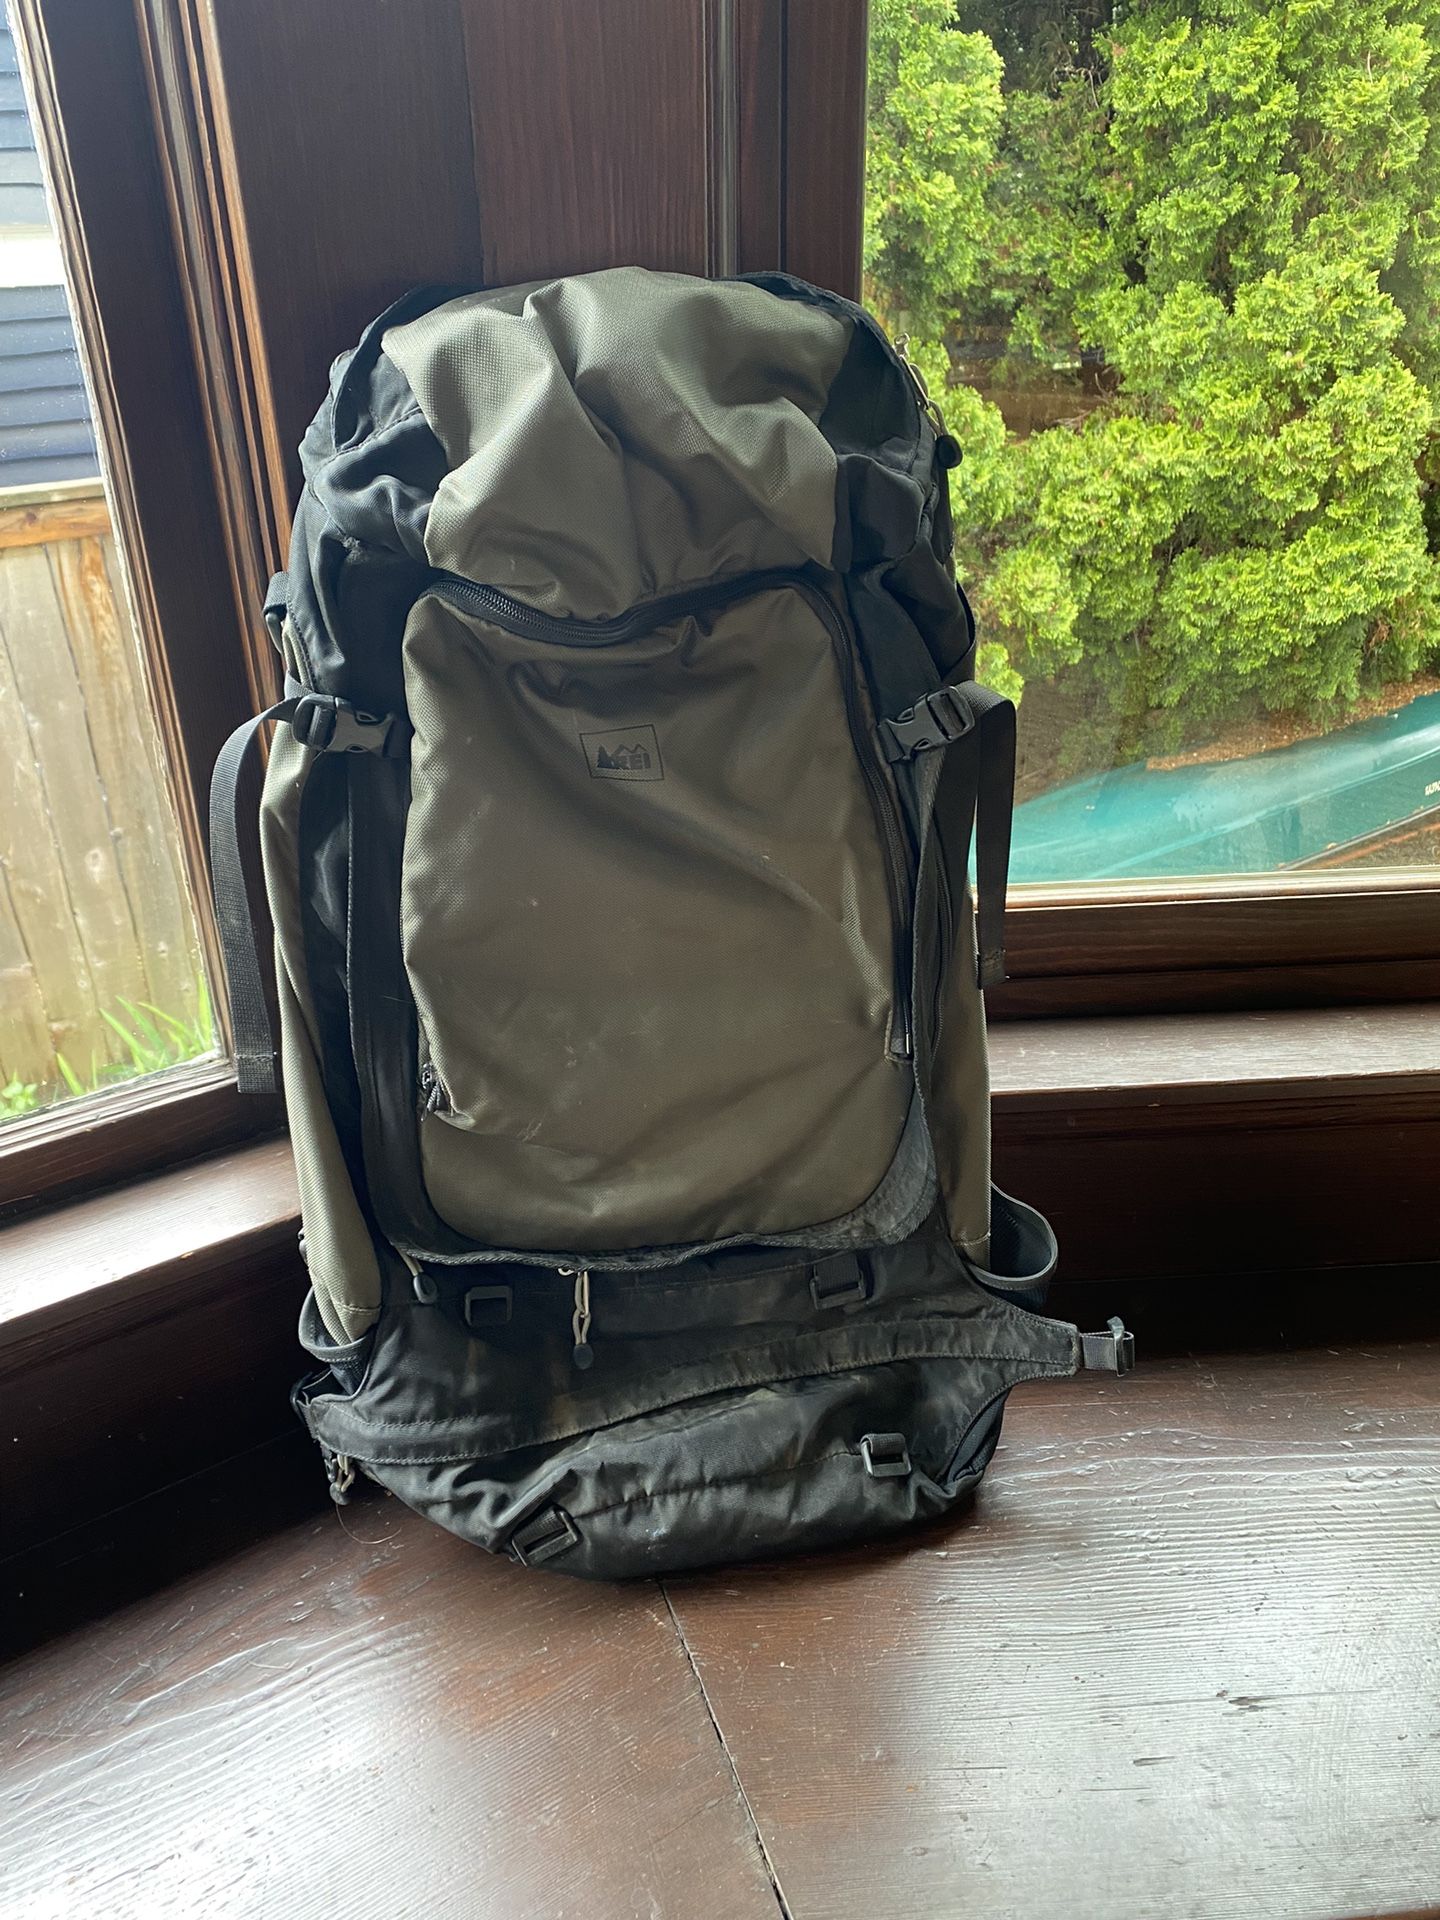 REI Backpacking Backpack / Carry-on / Travel Bag